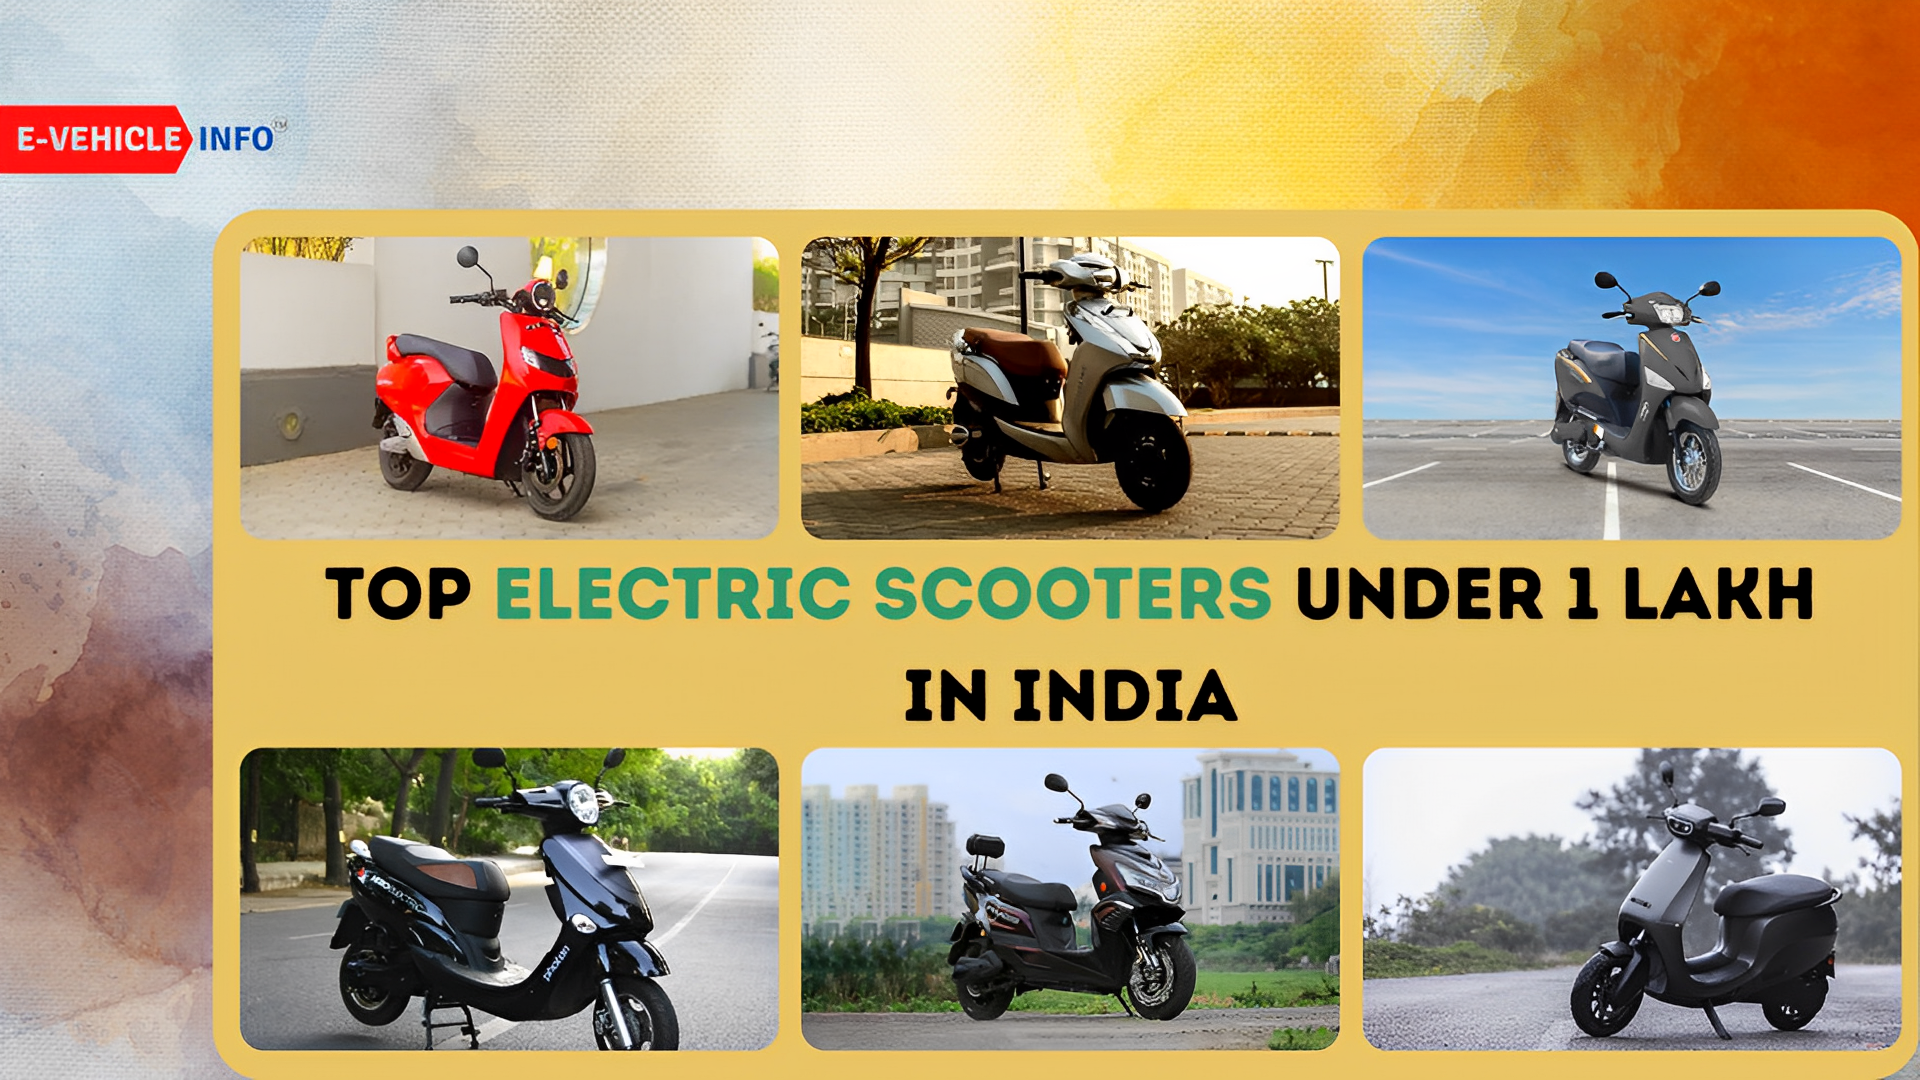 https://e-vehicleinfo.com/top-7-affordable-electric-scooters-under-1-lakh-in-india/